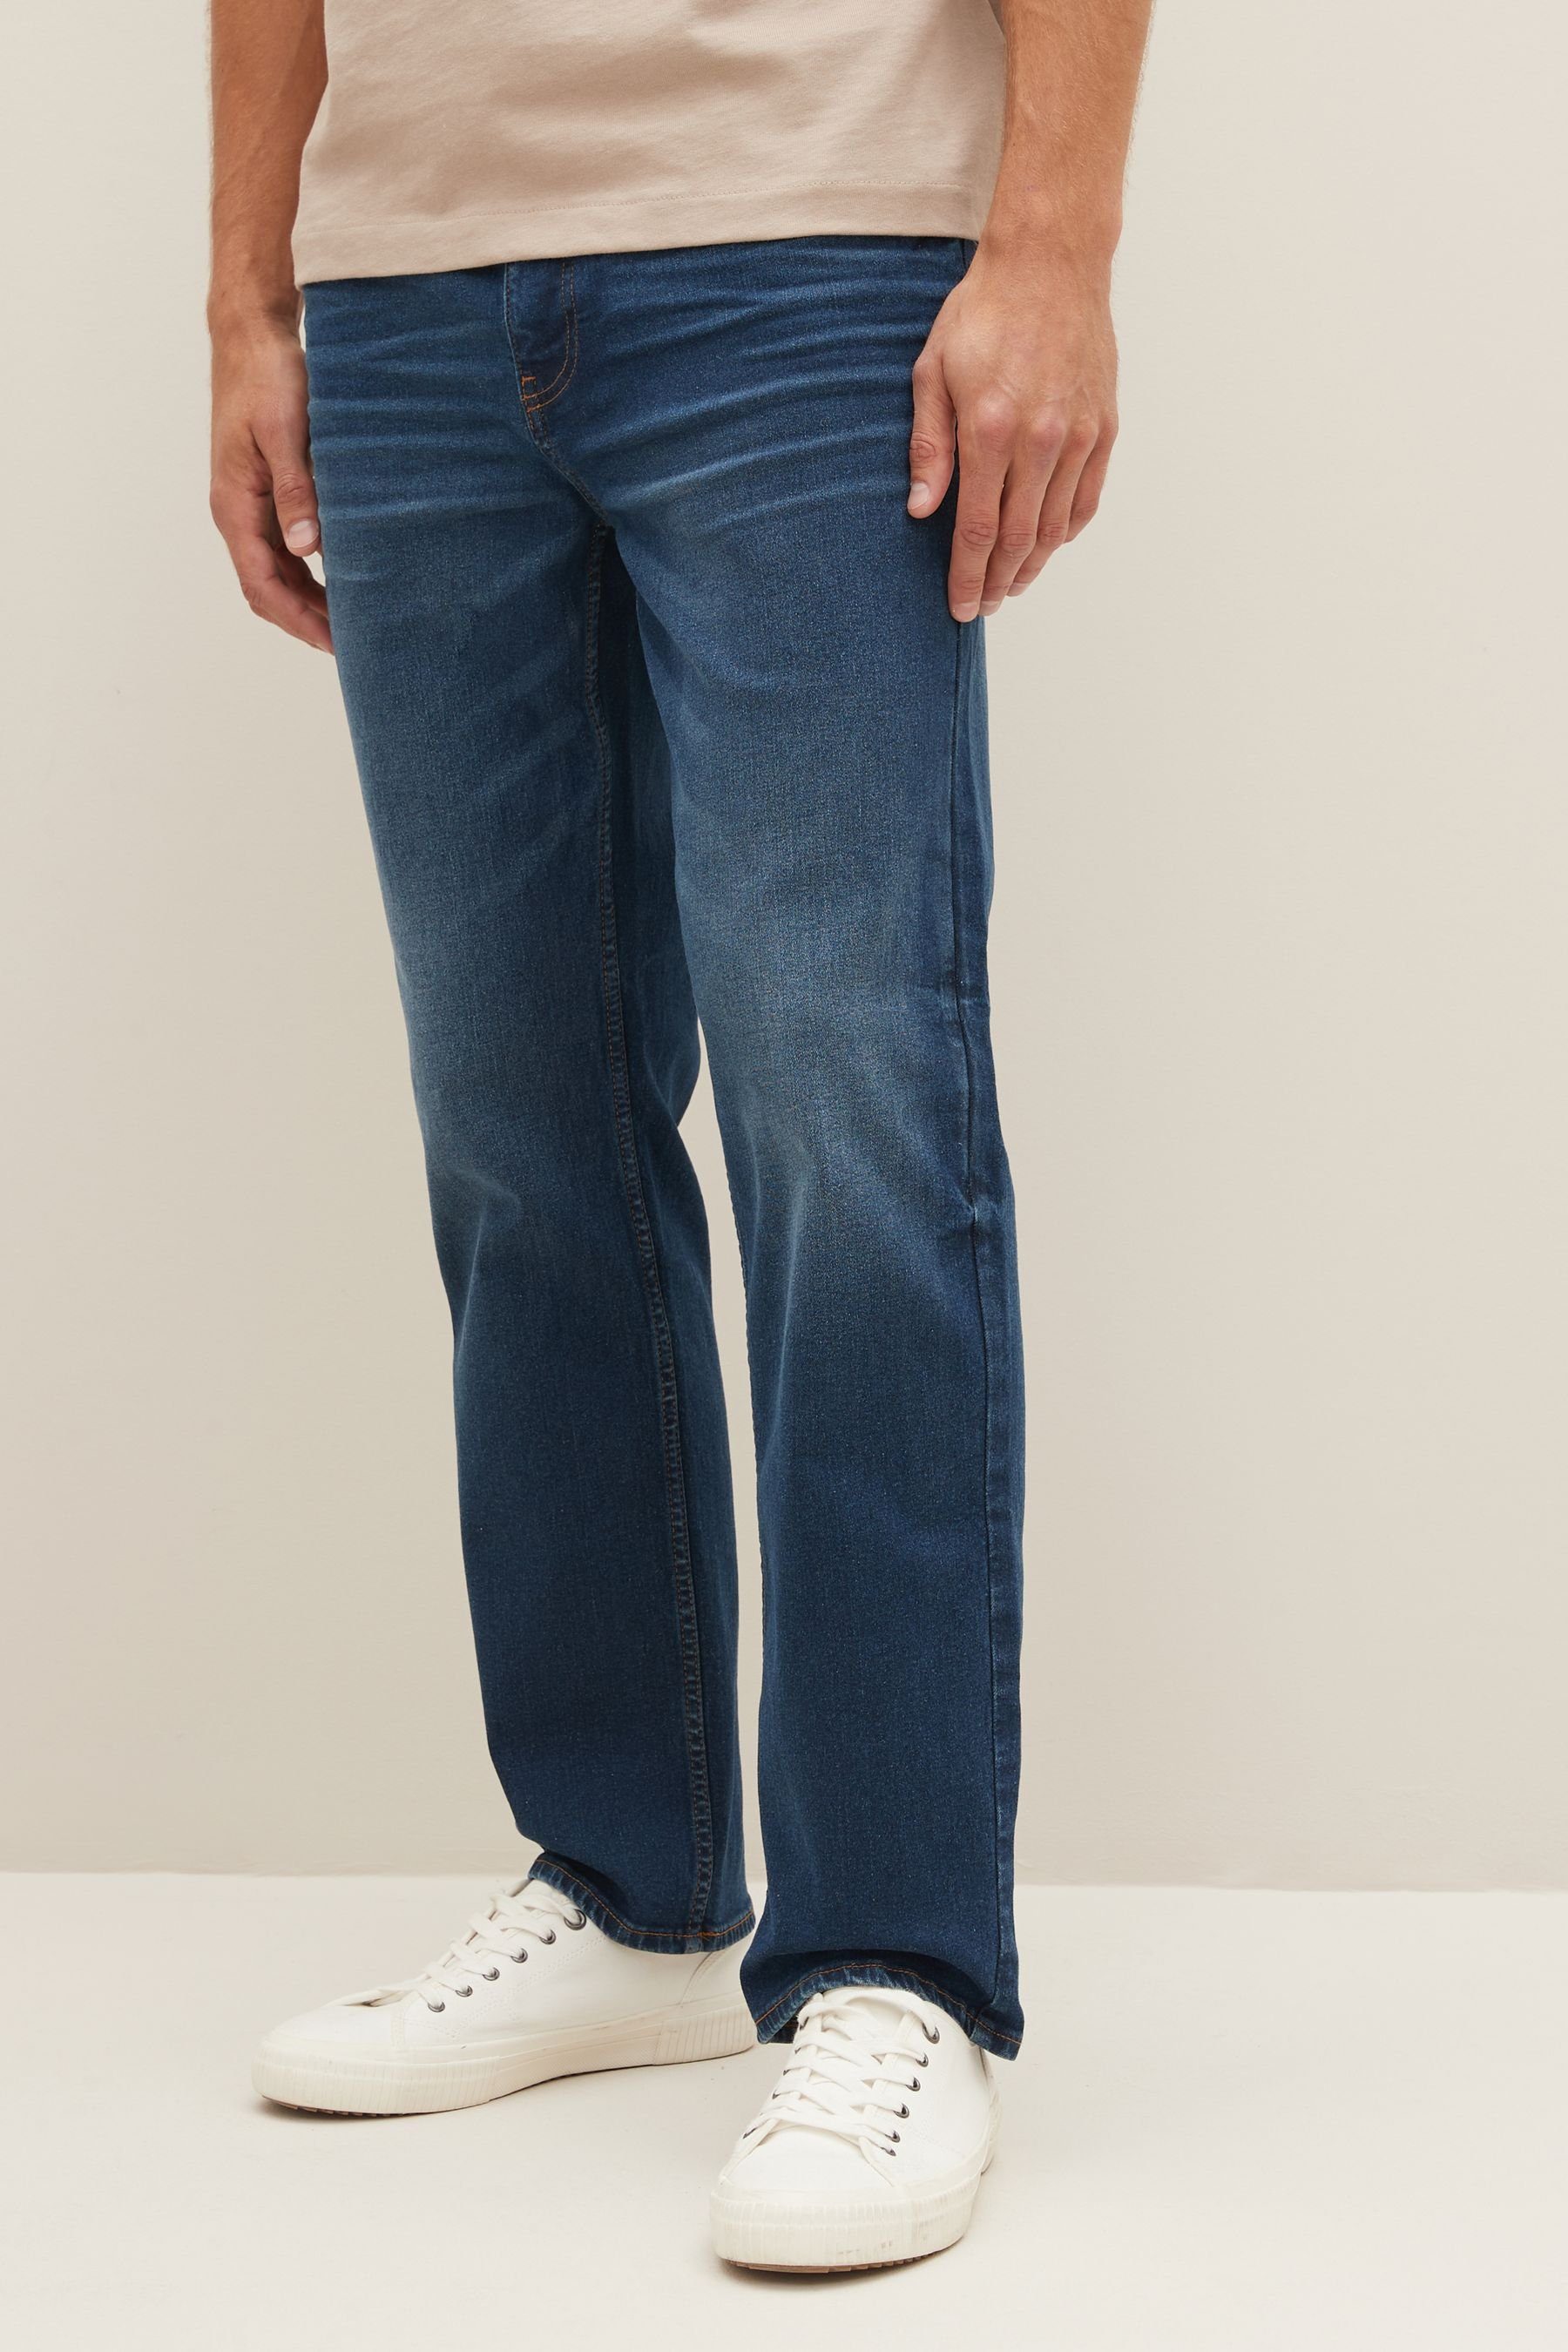 Mid 2er-Pack Next Stretch-Jeans im Straight-Jeans Blue Essential Fit (2-tlg) Straight Blue/Light